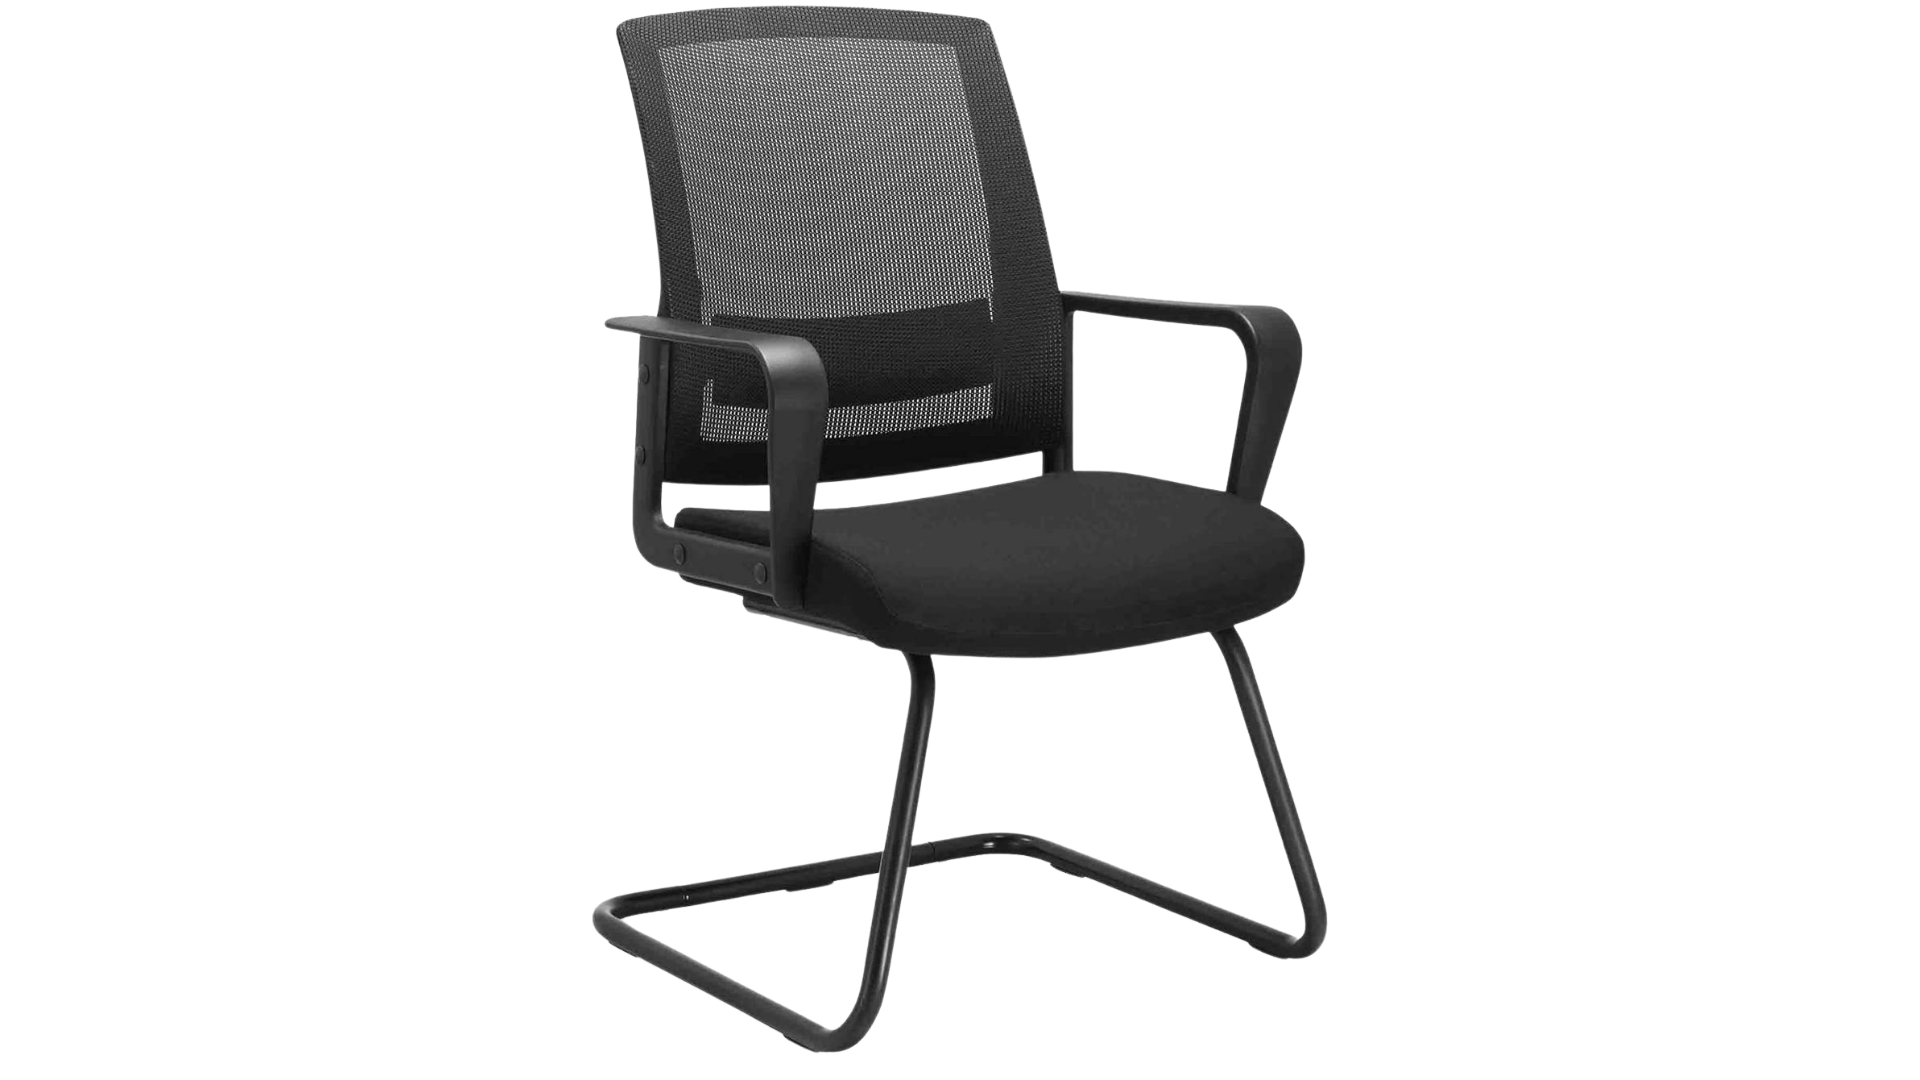 15 Best Desk Chairs With No Wheels, Black Desk Chair No Wheels